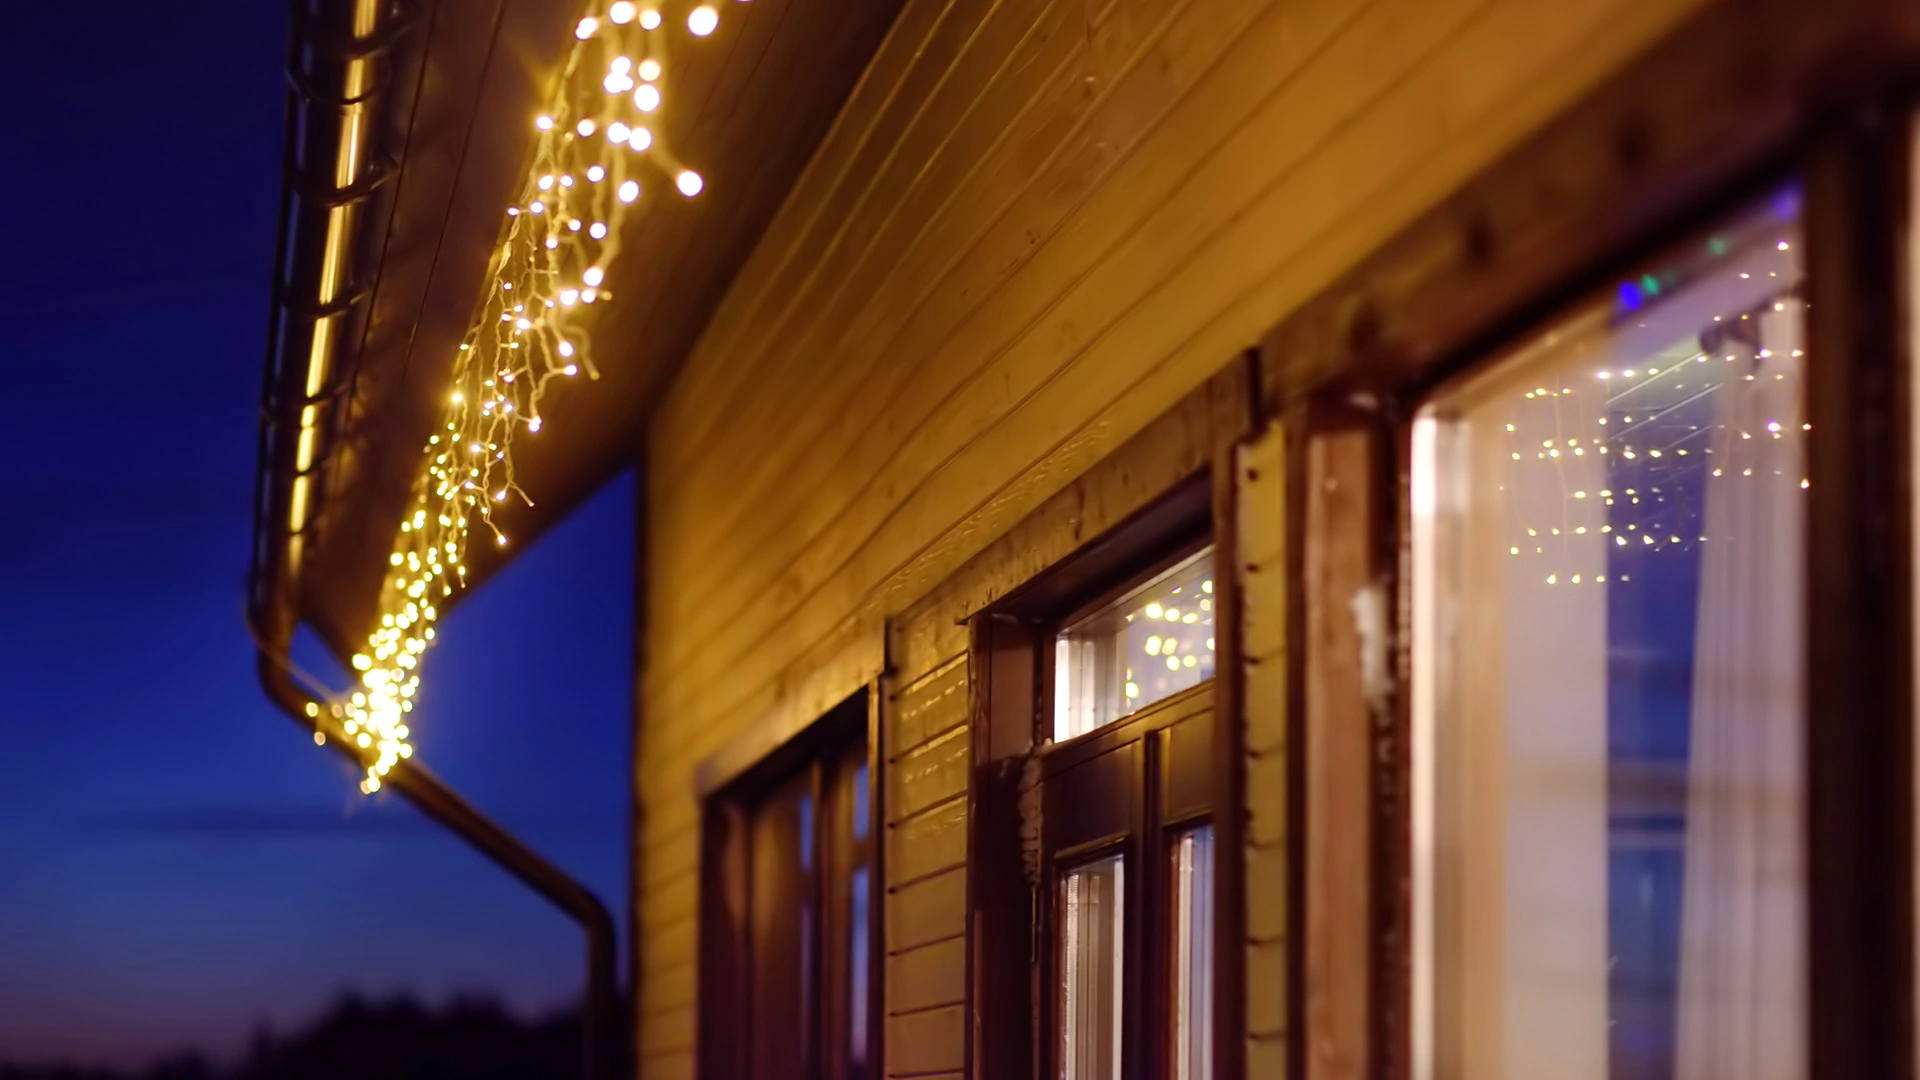 Make Sure That You’re Using LED Lights for Your Holiday Lighting Display